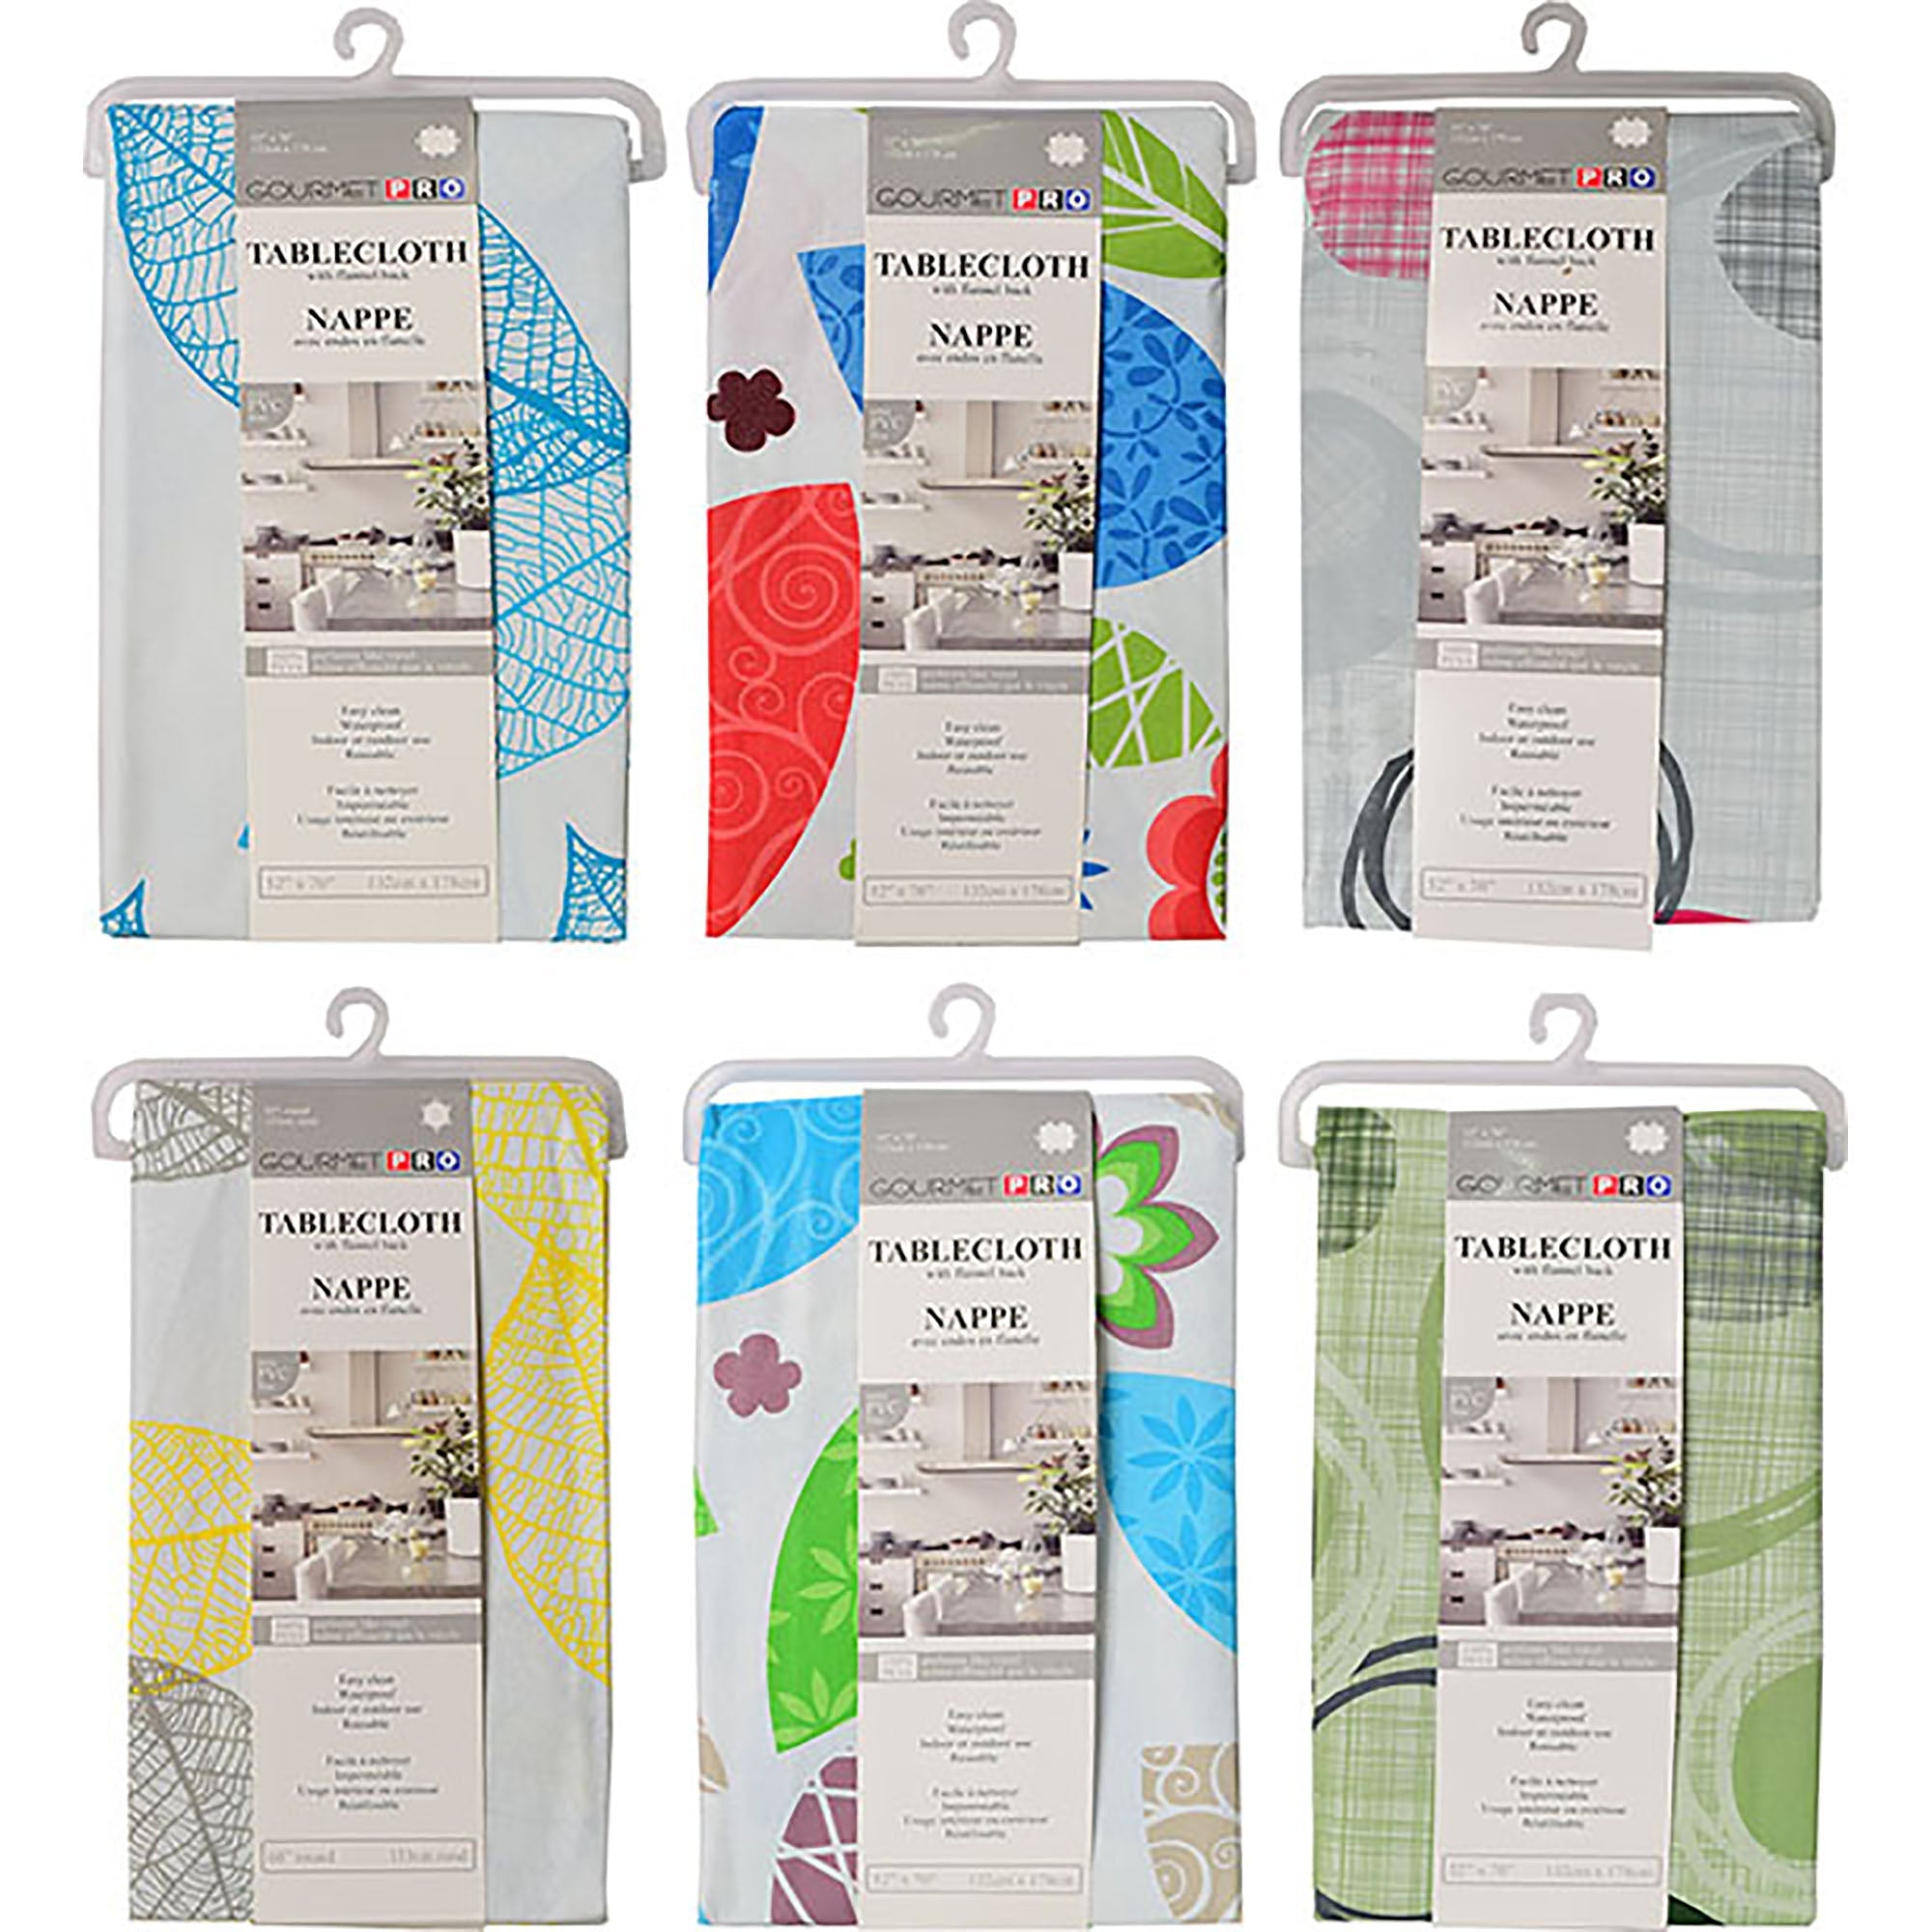 Gourmet Pro Printed Peva Tablecloth Assorted